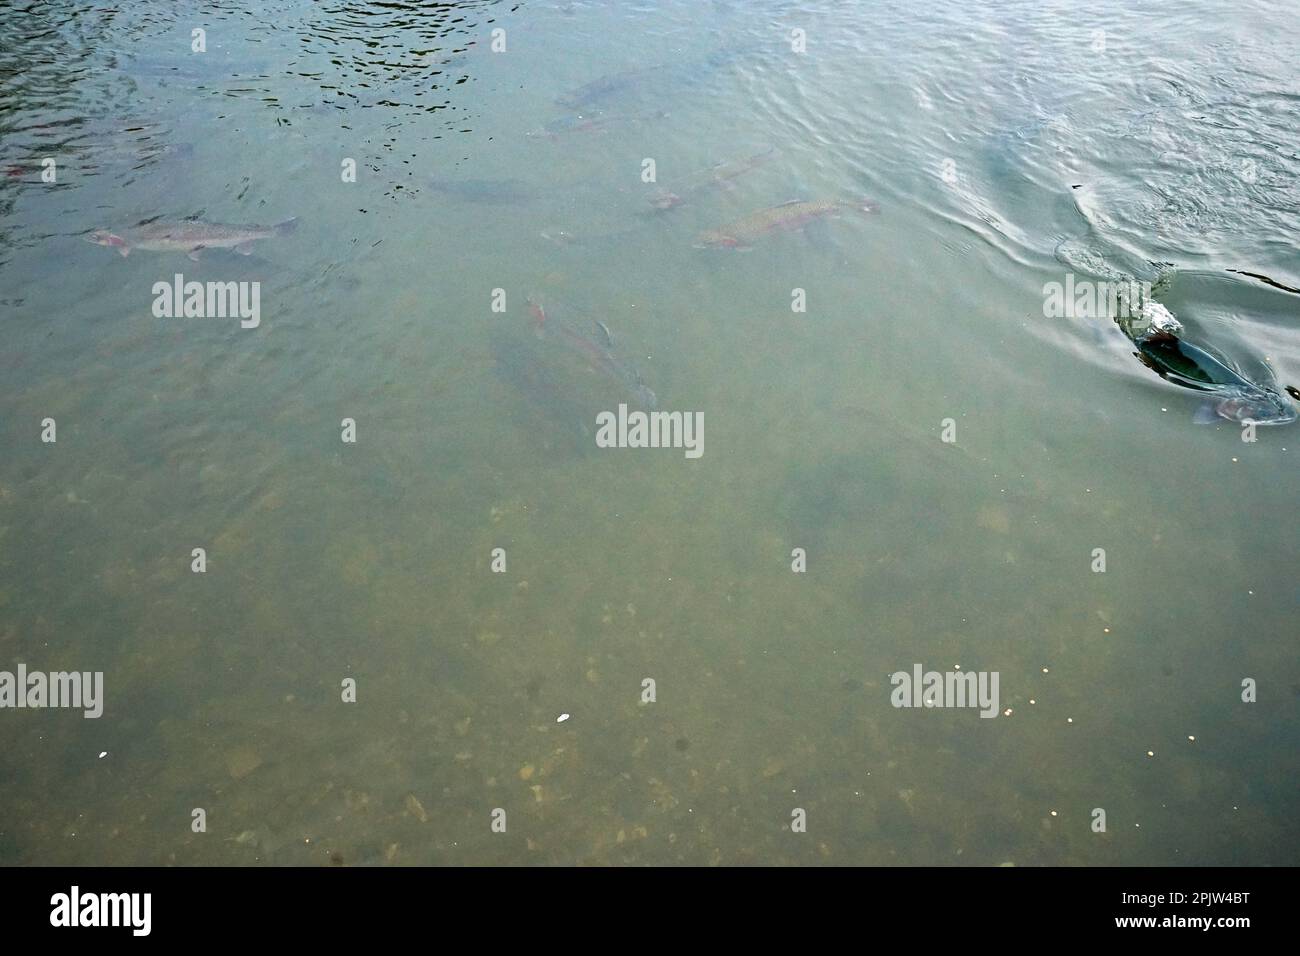 Feeding wild Trout fish in crystal clear lake Stock Photo